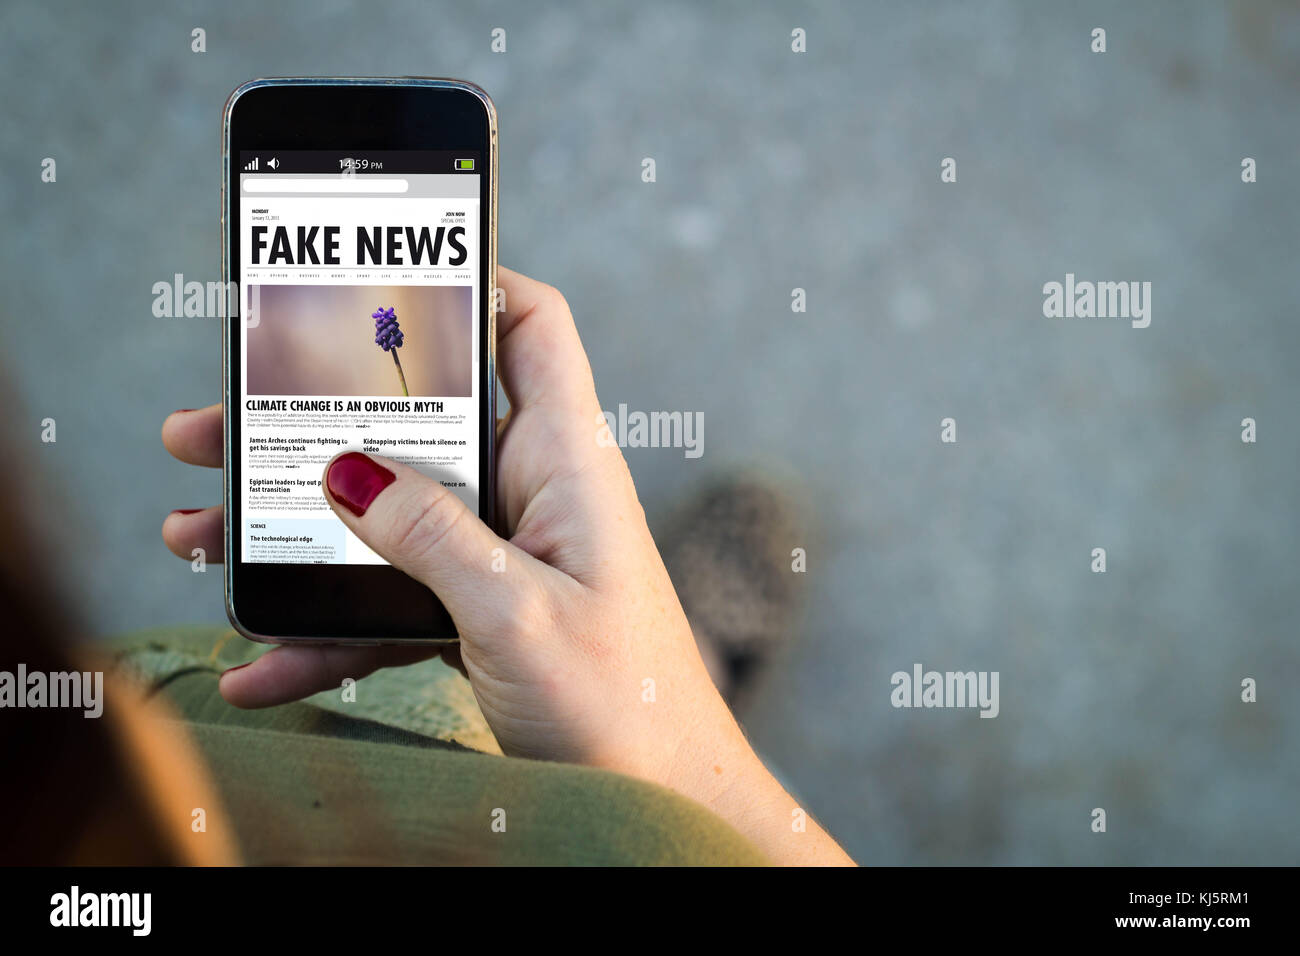 Top view of woman walking in the street using her mobile phone with fake news. All screen graphics are made up. Stock Photo